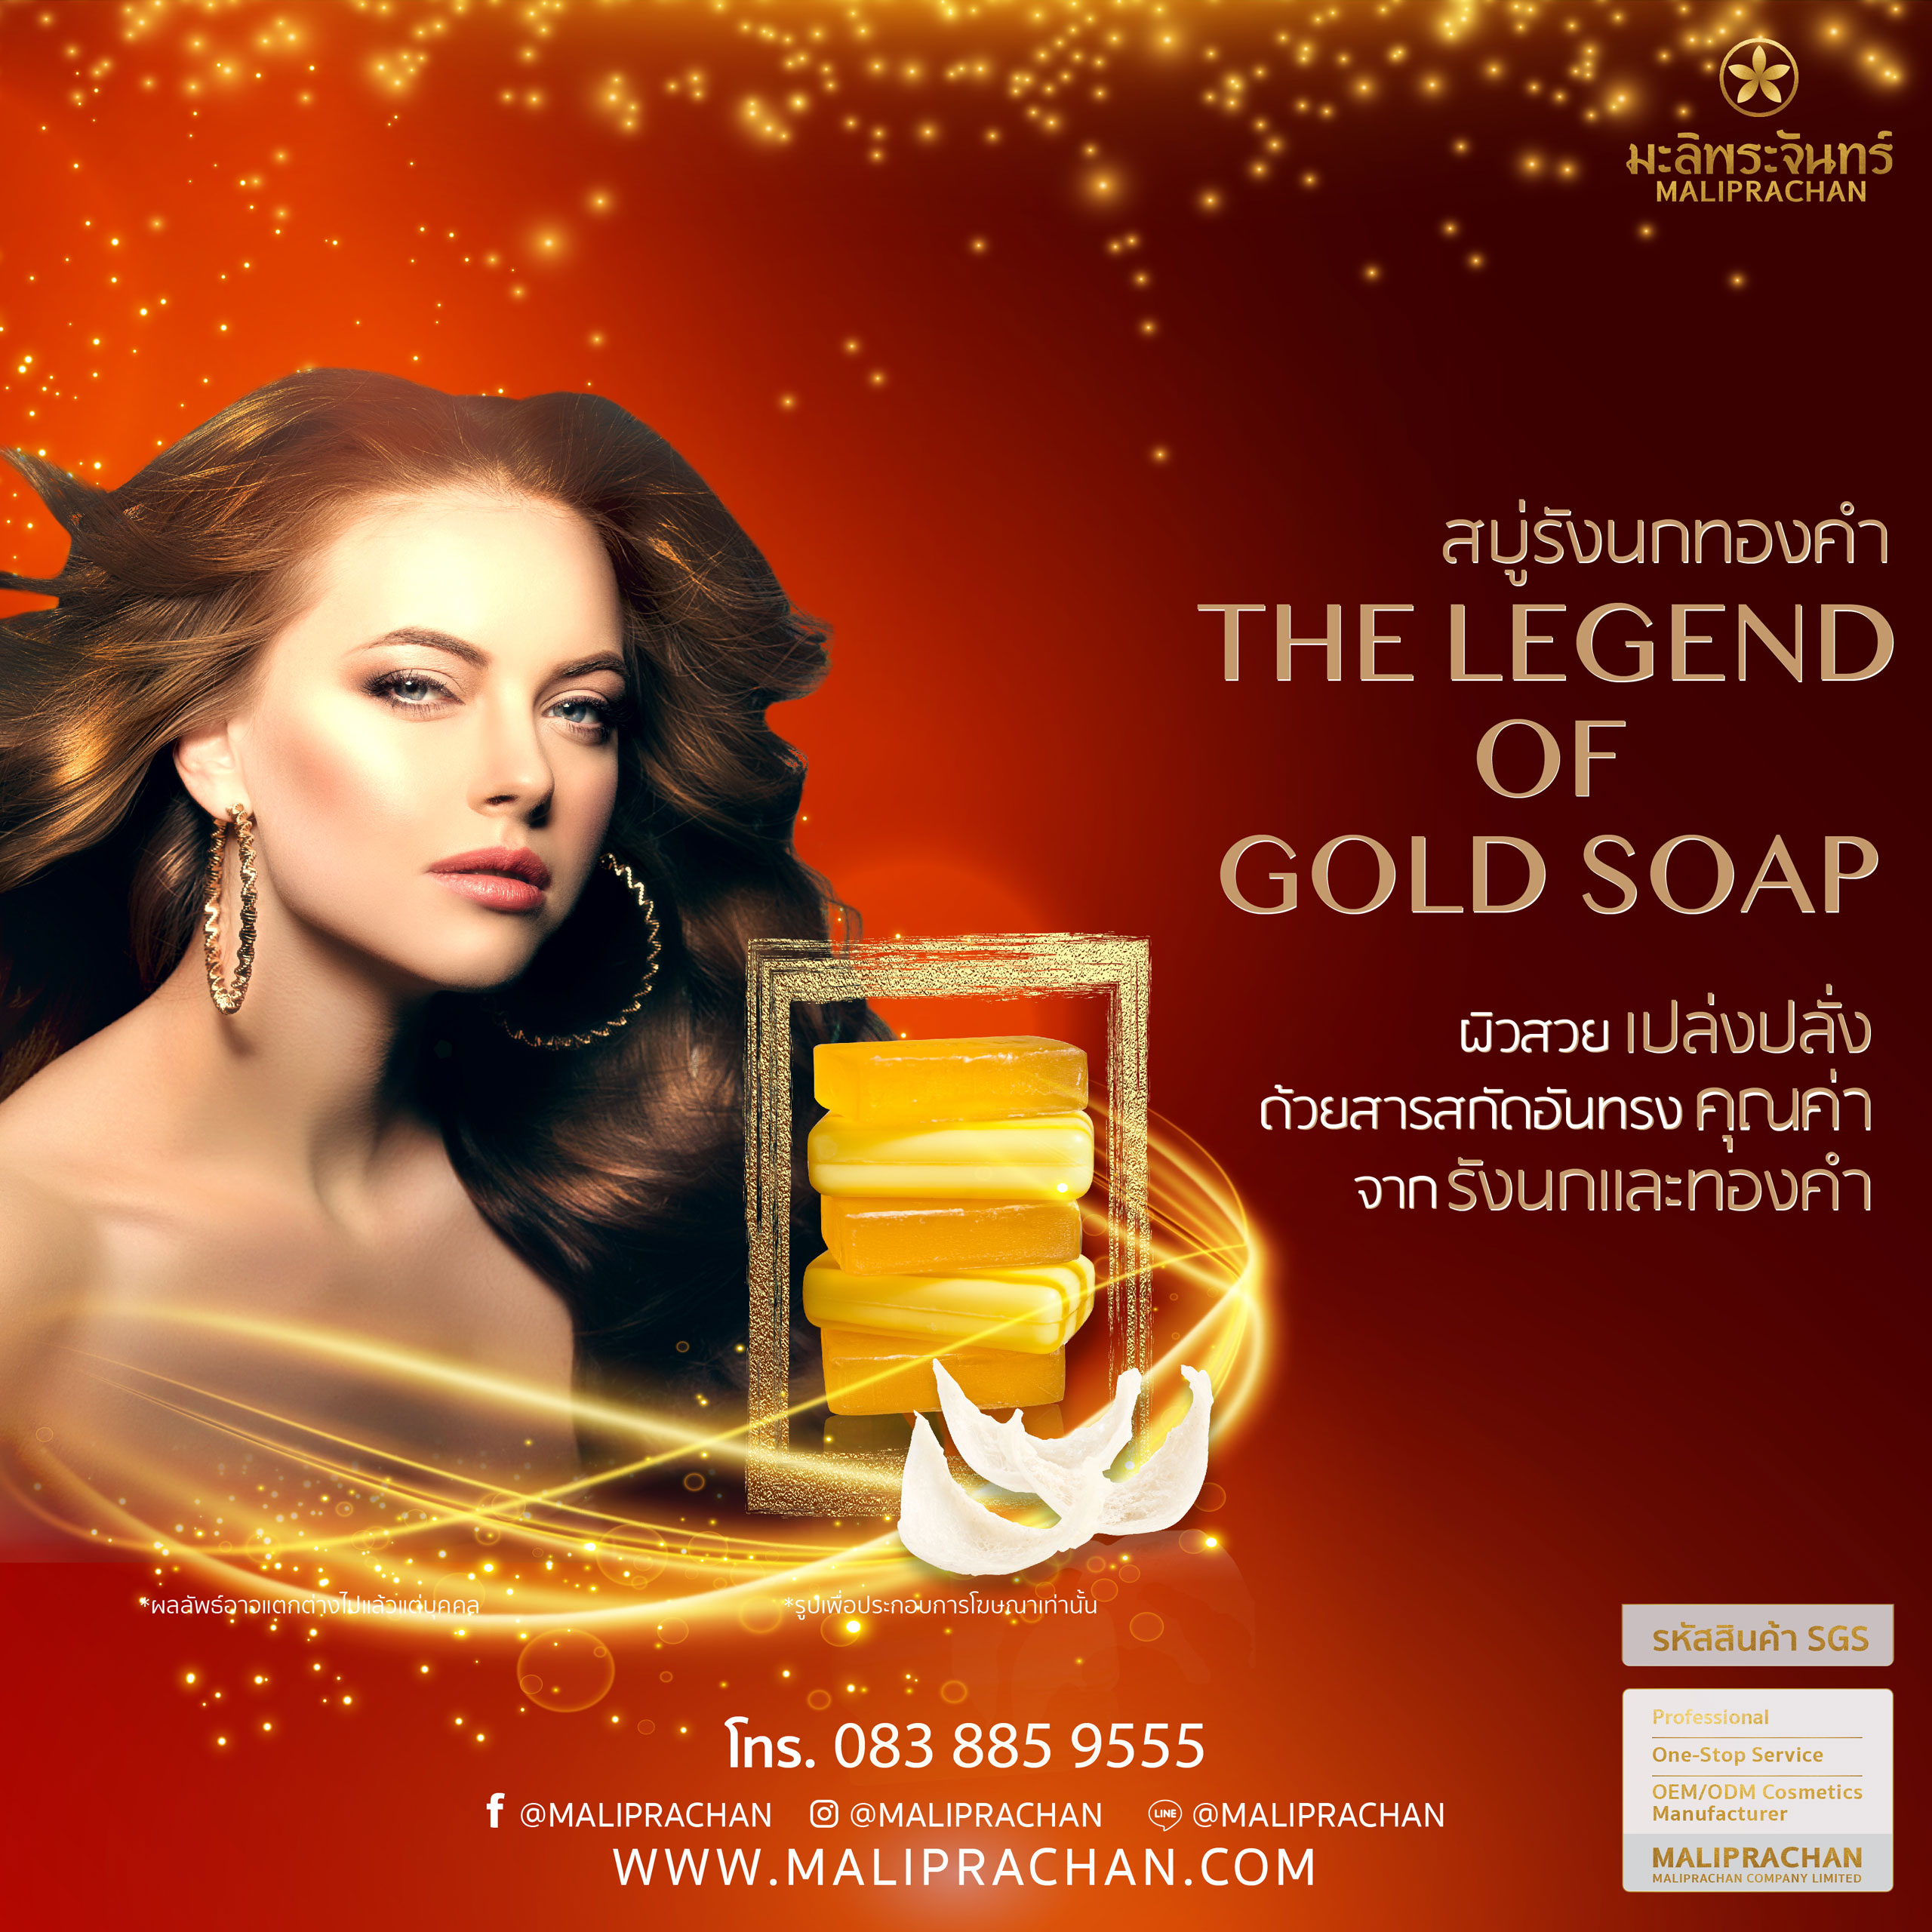 The Legend of Gold Soap